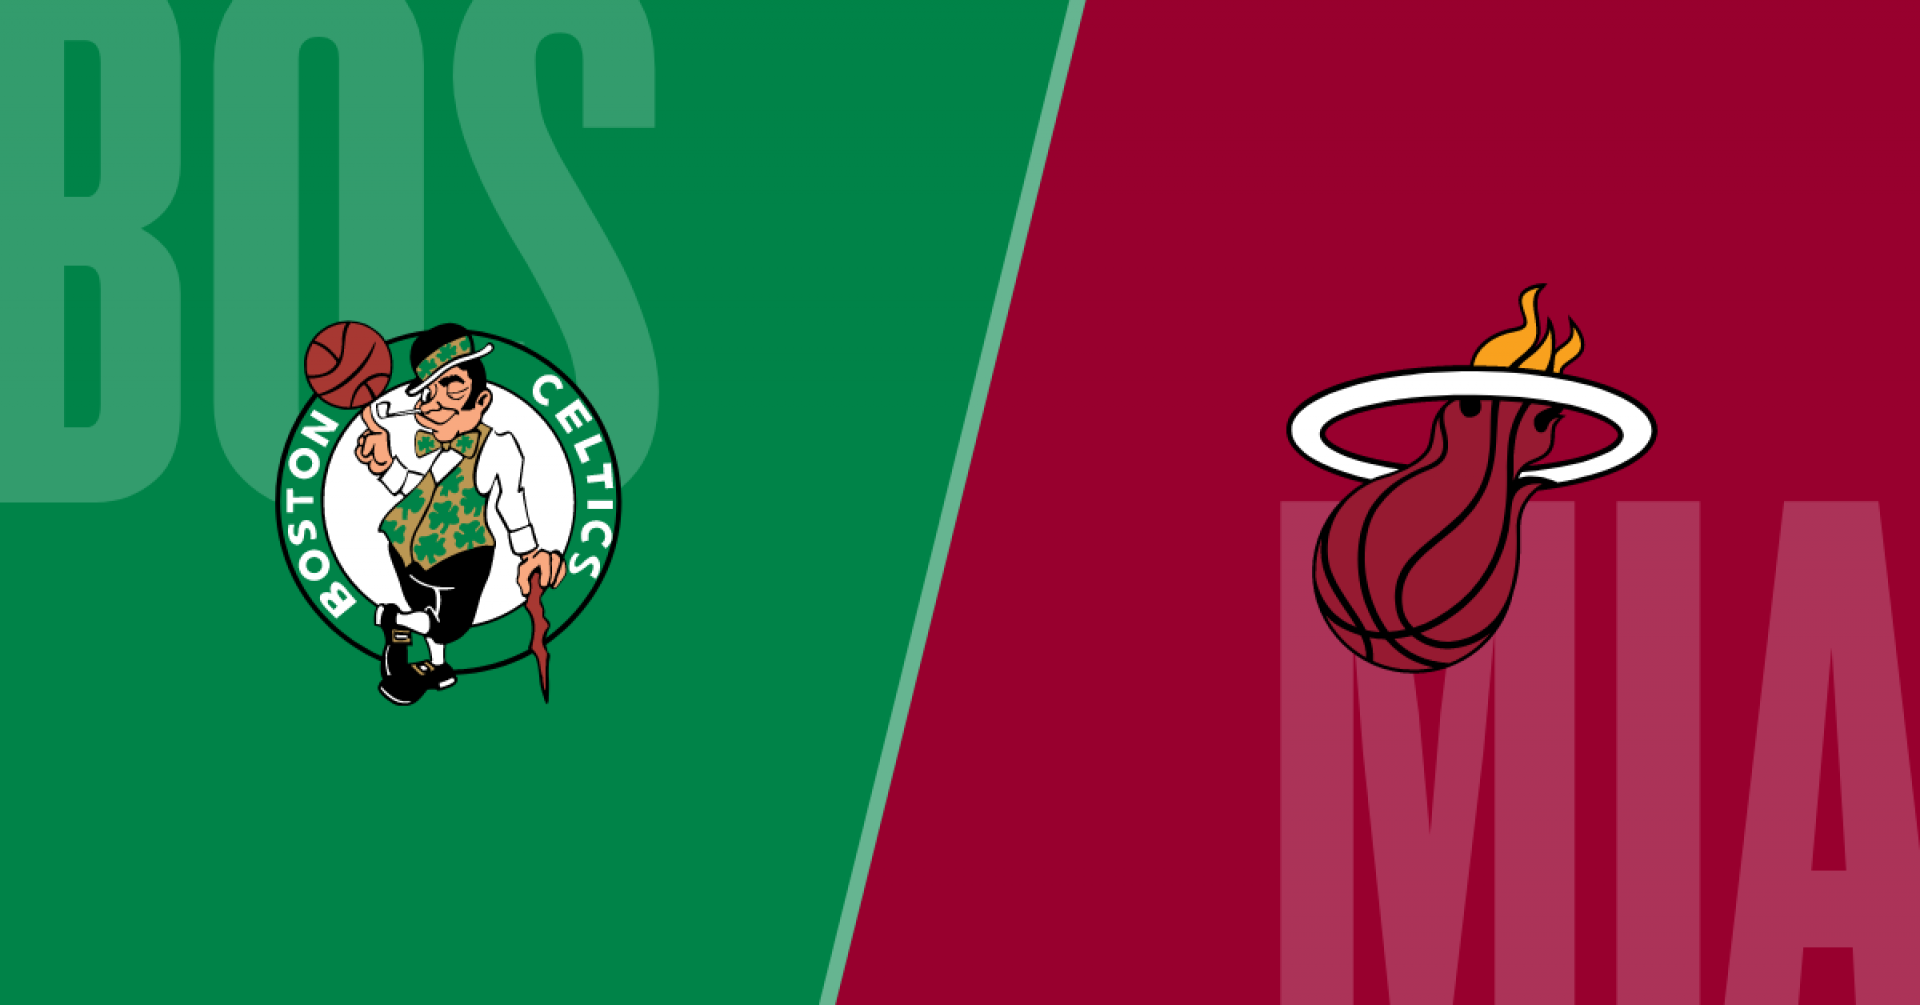 Logo matchup of the Celtics and Heat